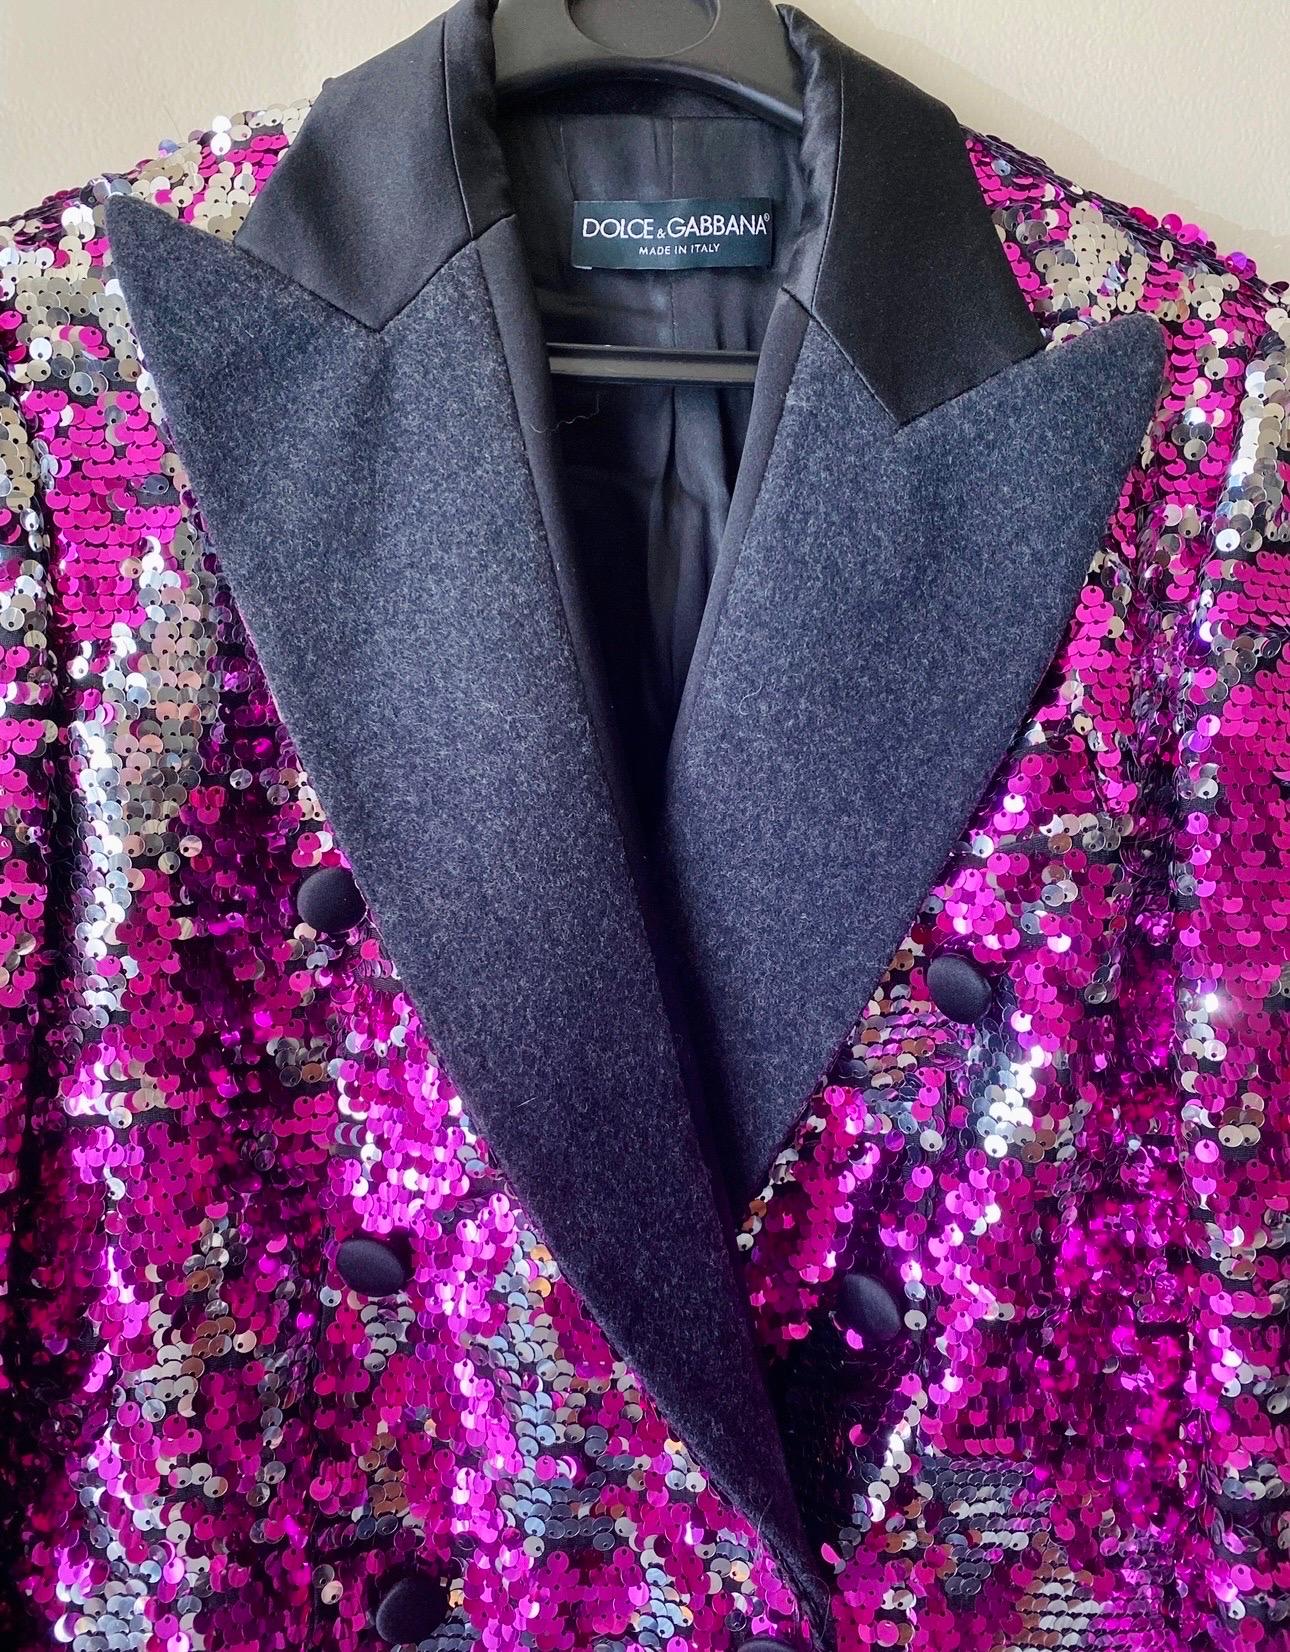 Dolce & Gabbana runway Fall Winter 2011 pink sequined jacket as seen on Beyonce performing for the MTV awards in 2011, fits perfectly for a size 36 FR and 38 FR, it’s a size 38 IT very good condition 